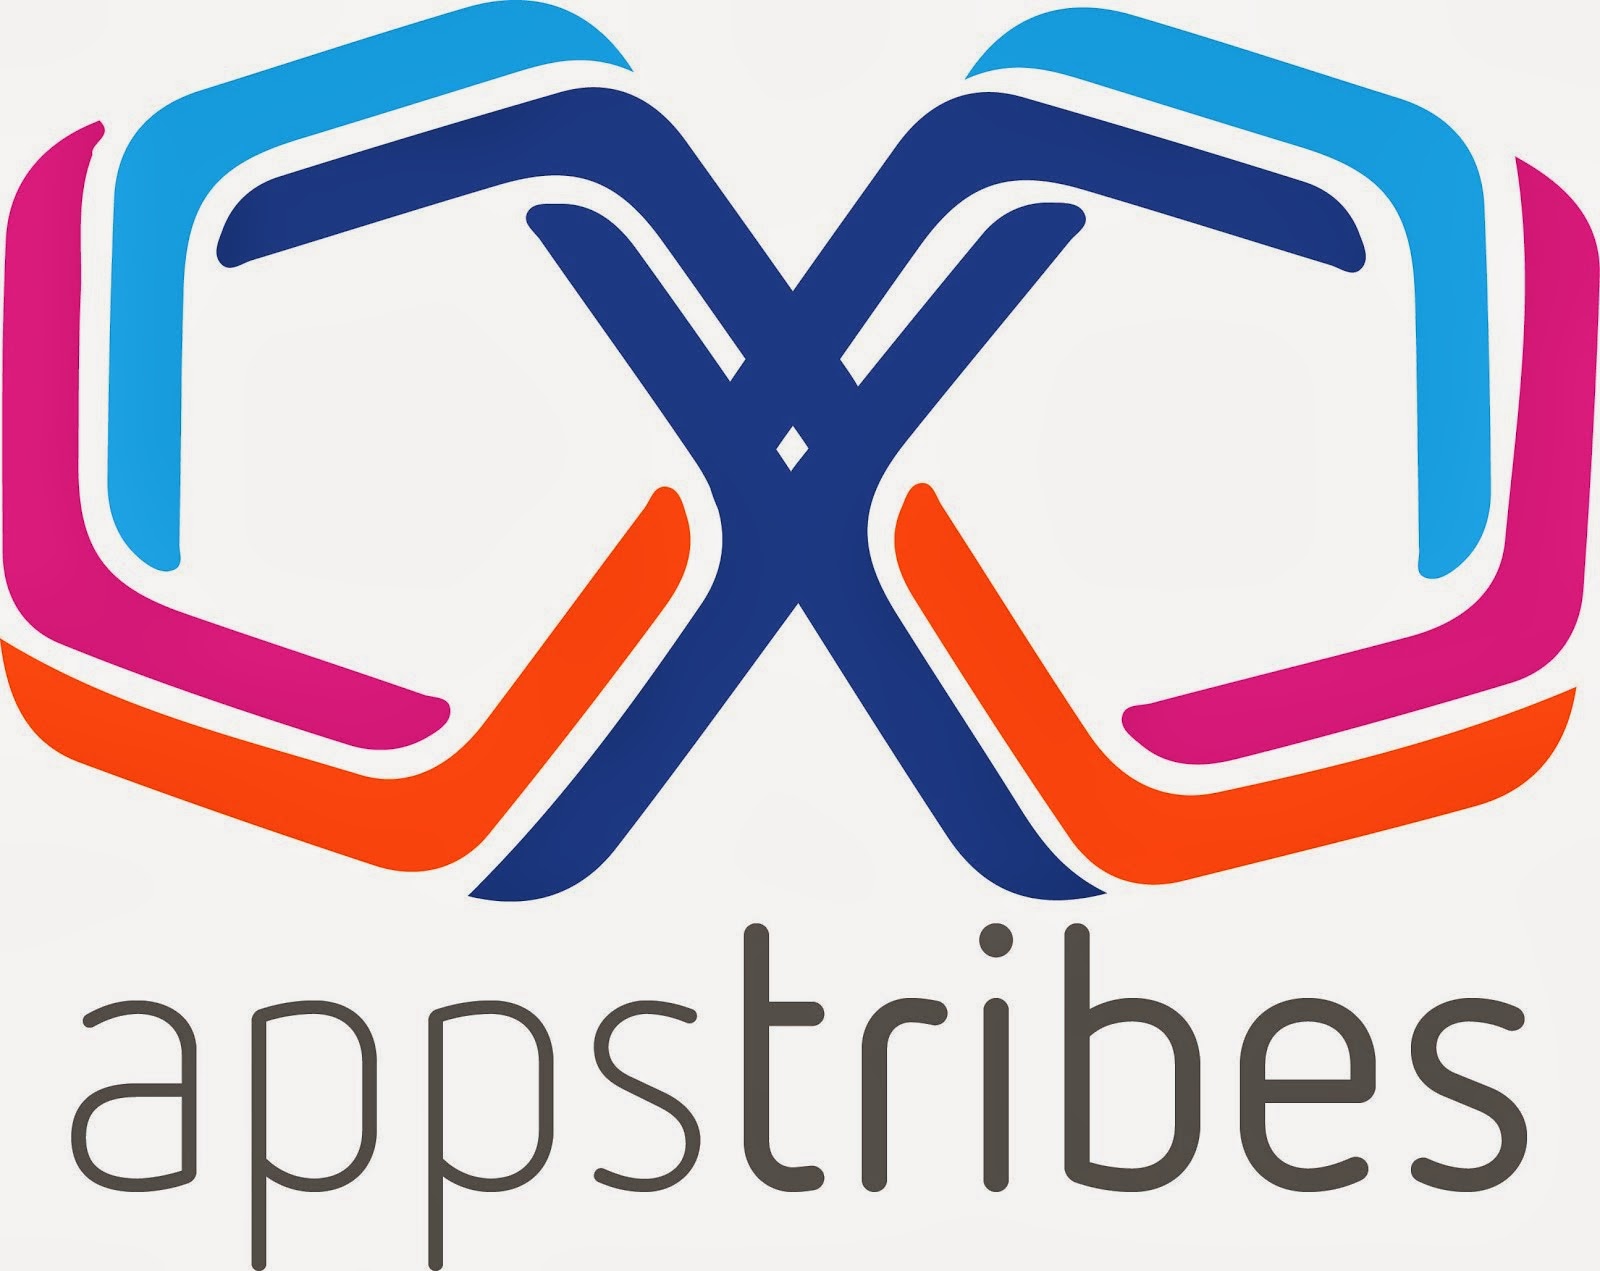 Appstribes